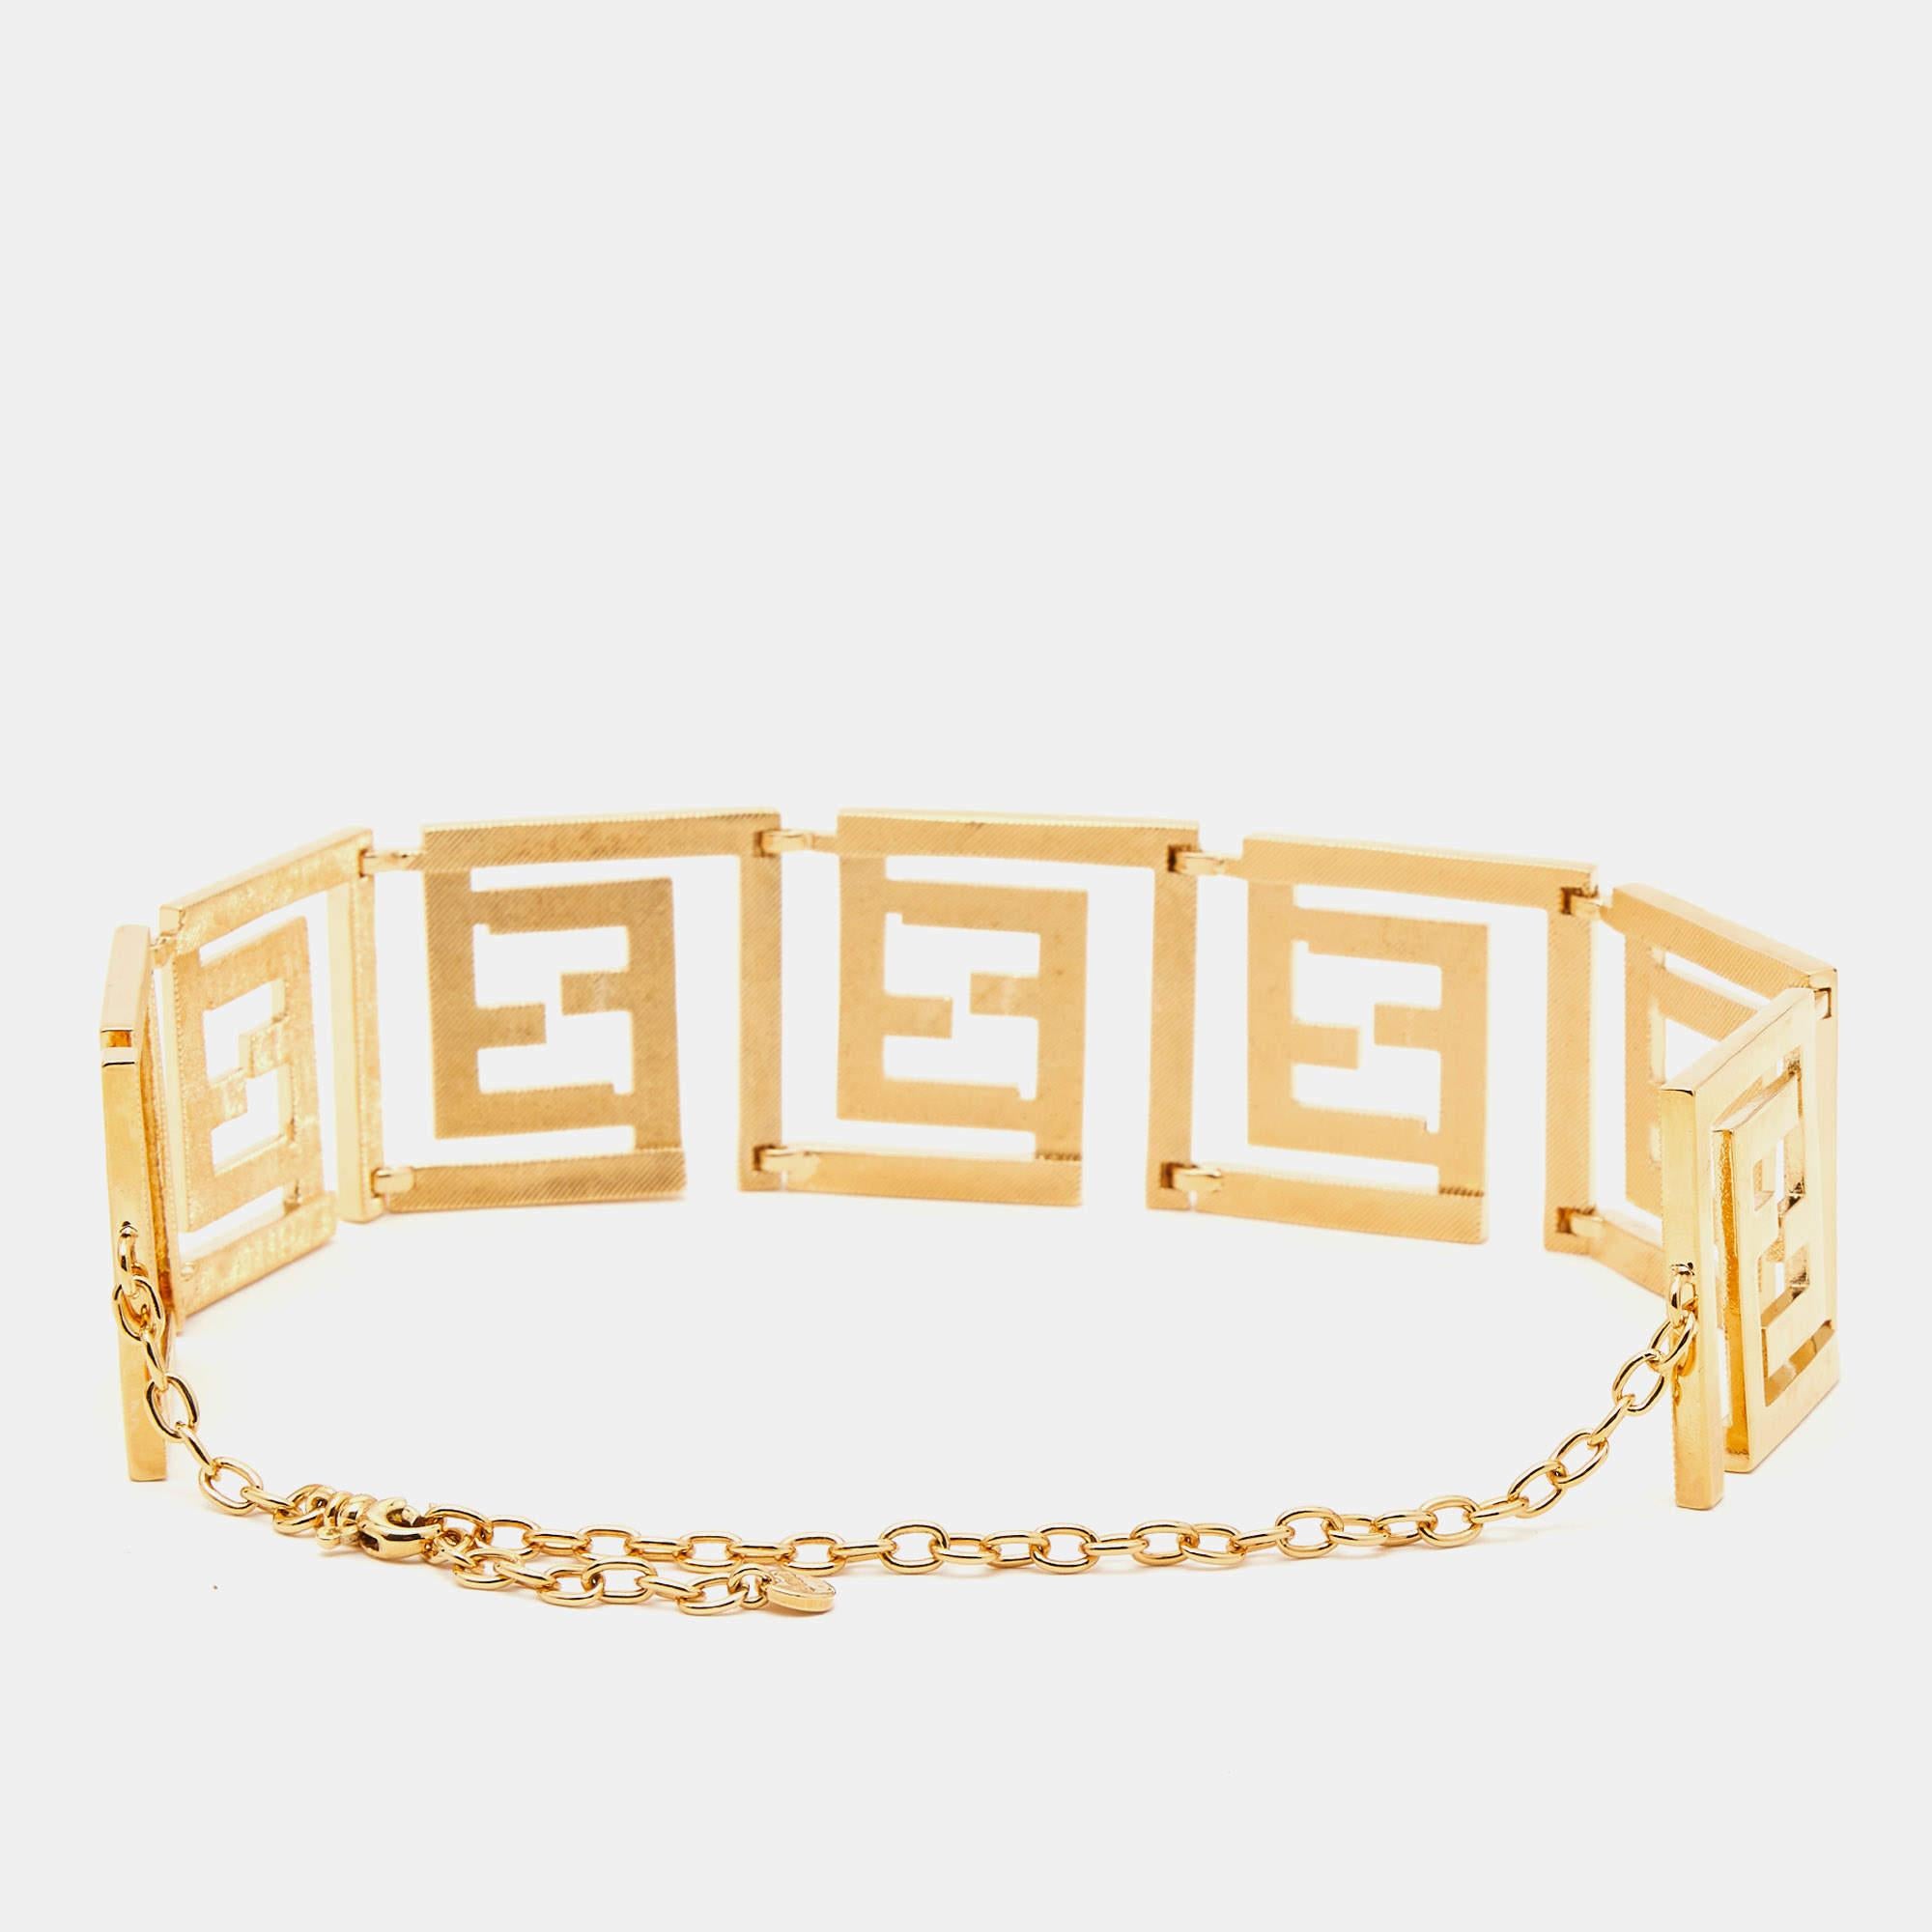 The Fendi x Versace Fendace necklace is a luxurious fashion accessory that exudes opulence and style. Crafted in exquisite gold-toned metal, it features a unique fusion of Fendi and Versace design elements, combining iconic logos and motifs to